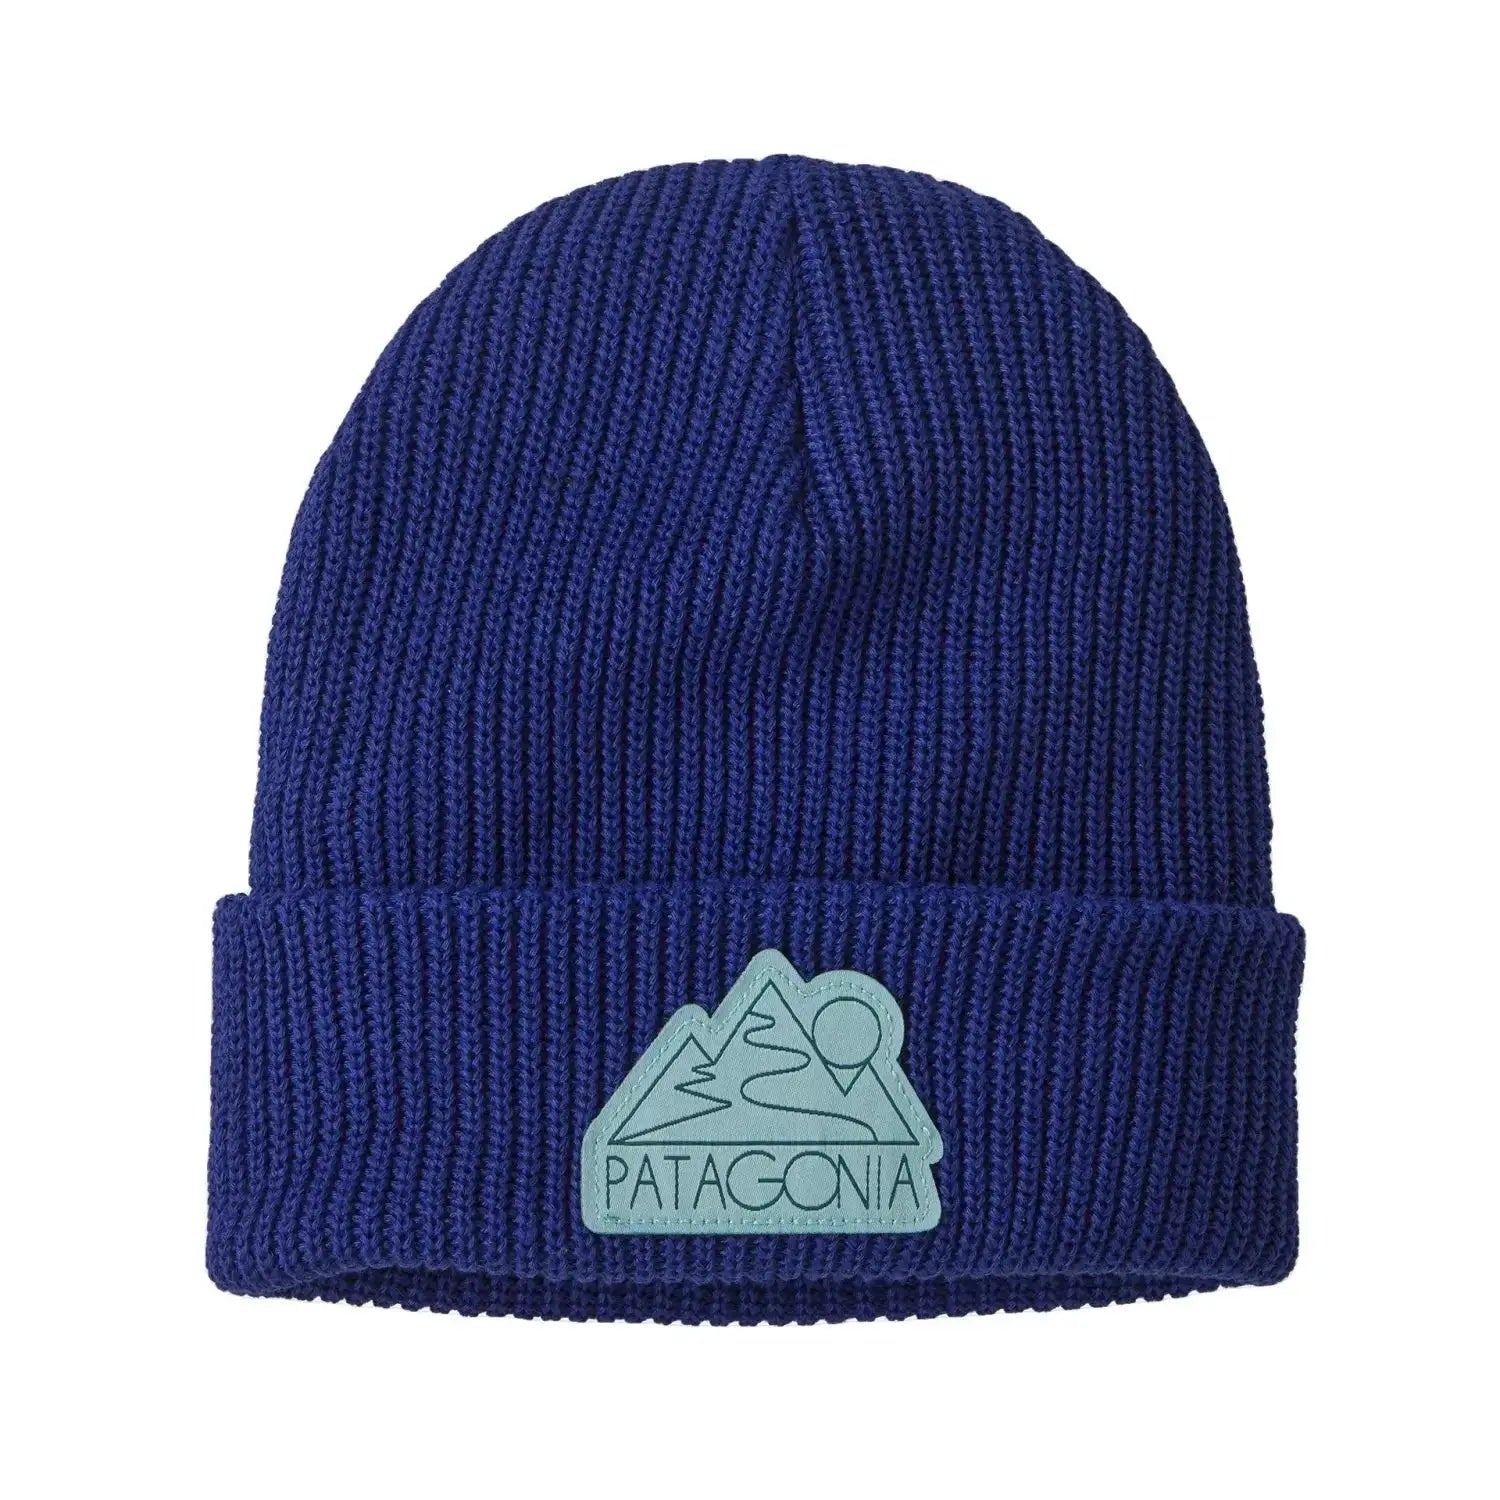 Patagonia K's Logo Beanie, Z's and S's Passage Blue, front view